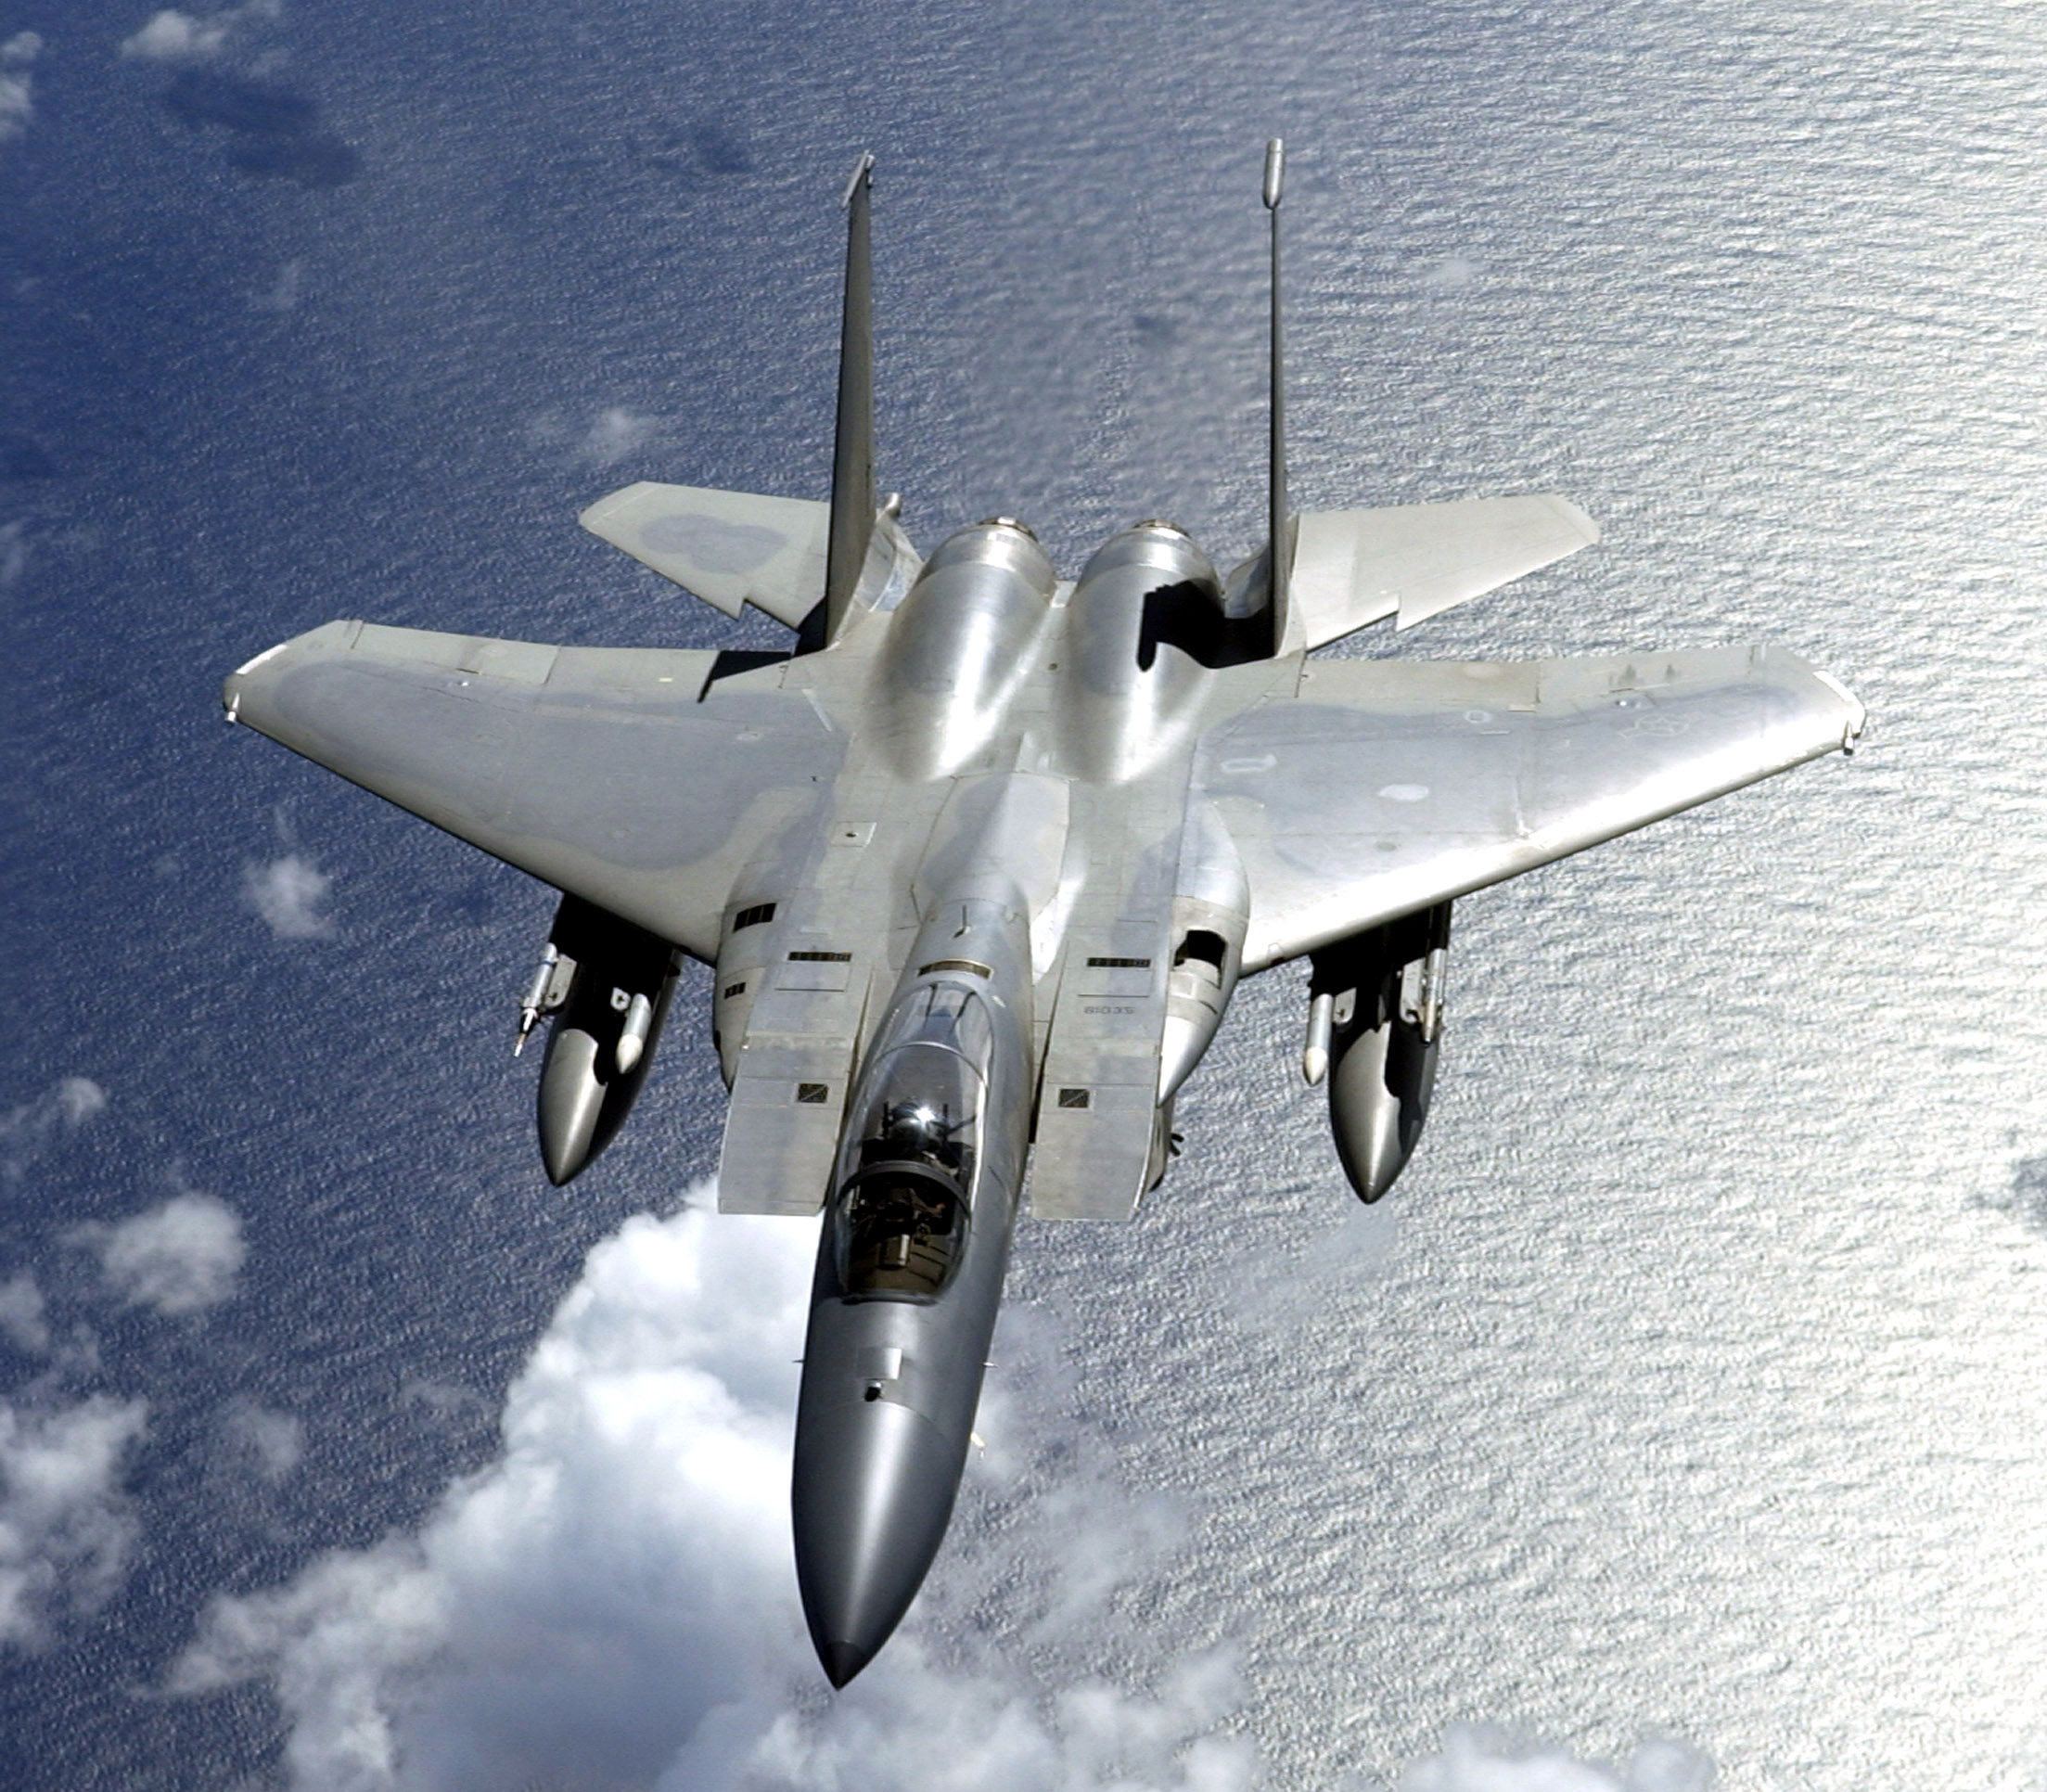 A F-15 Eagle fighter flying over water